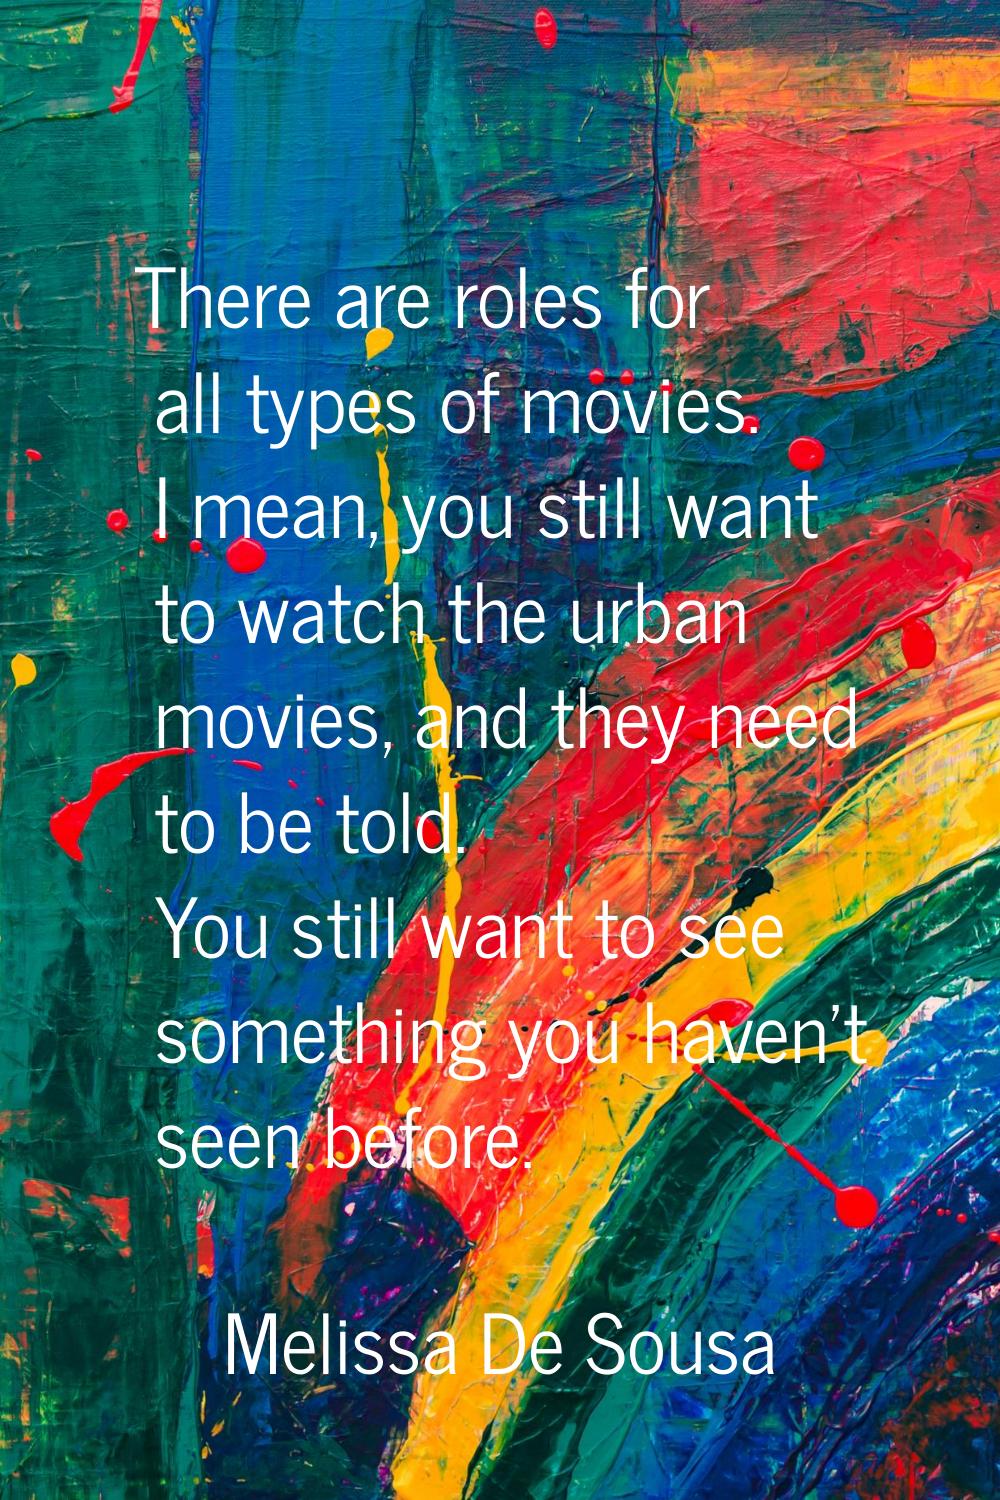 There are roles for all types of movies. I mean, you still want to watch the urban movies, and they